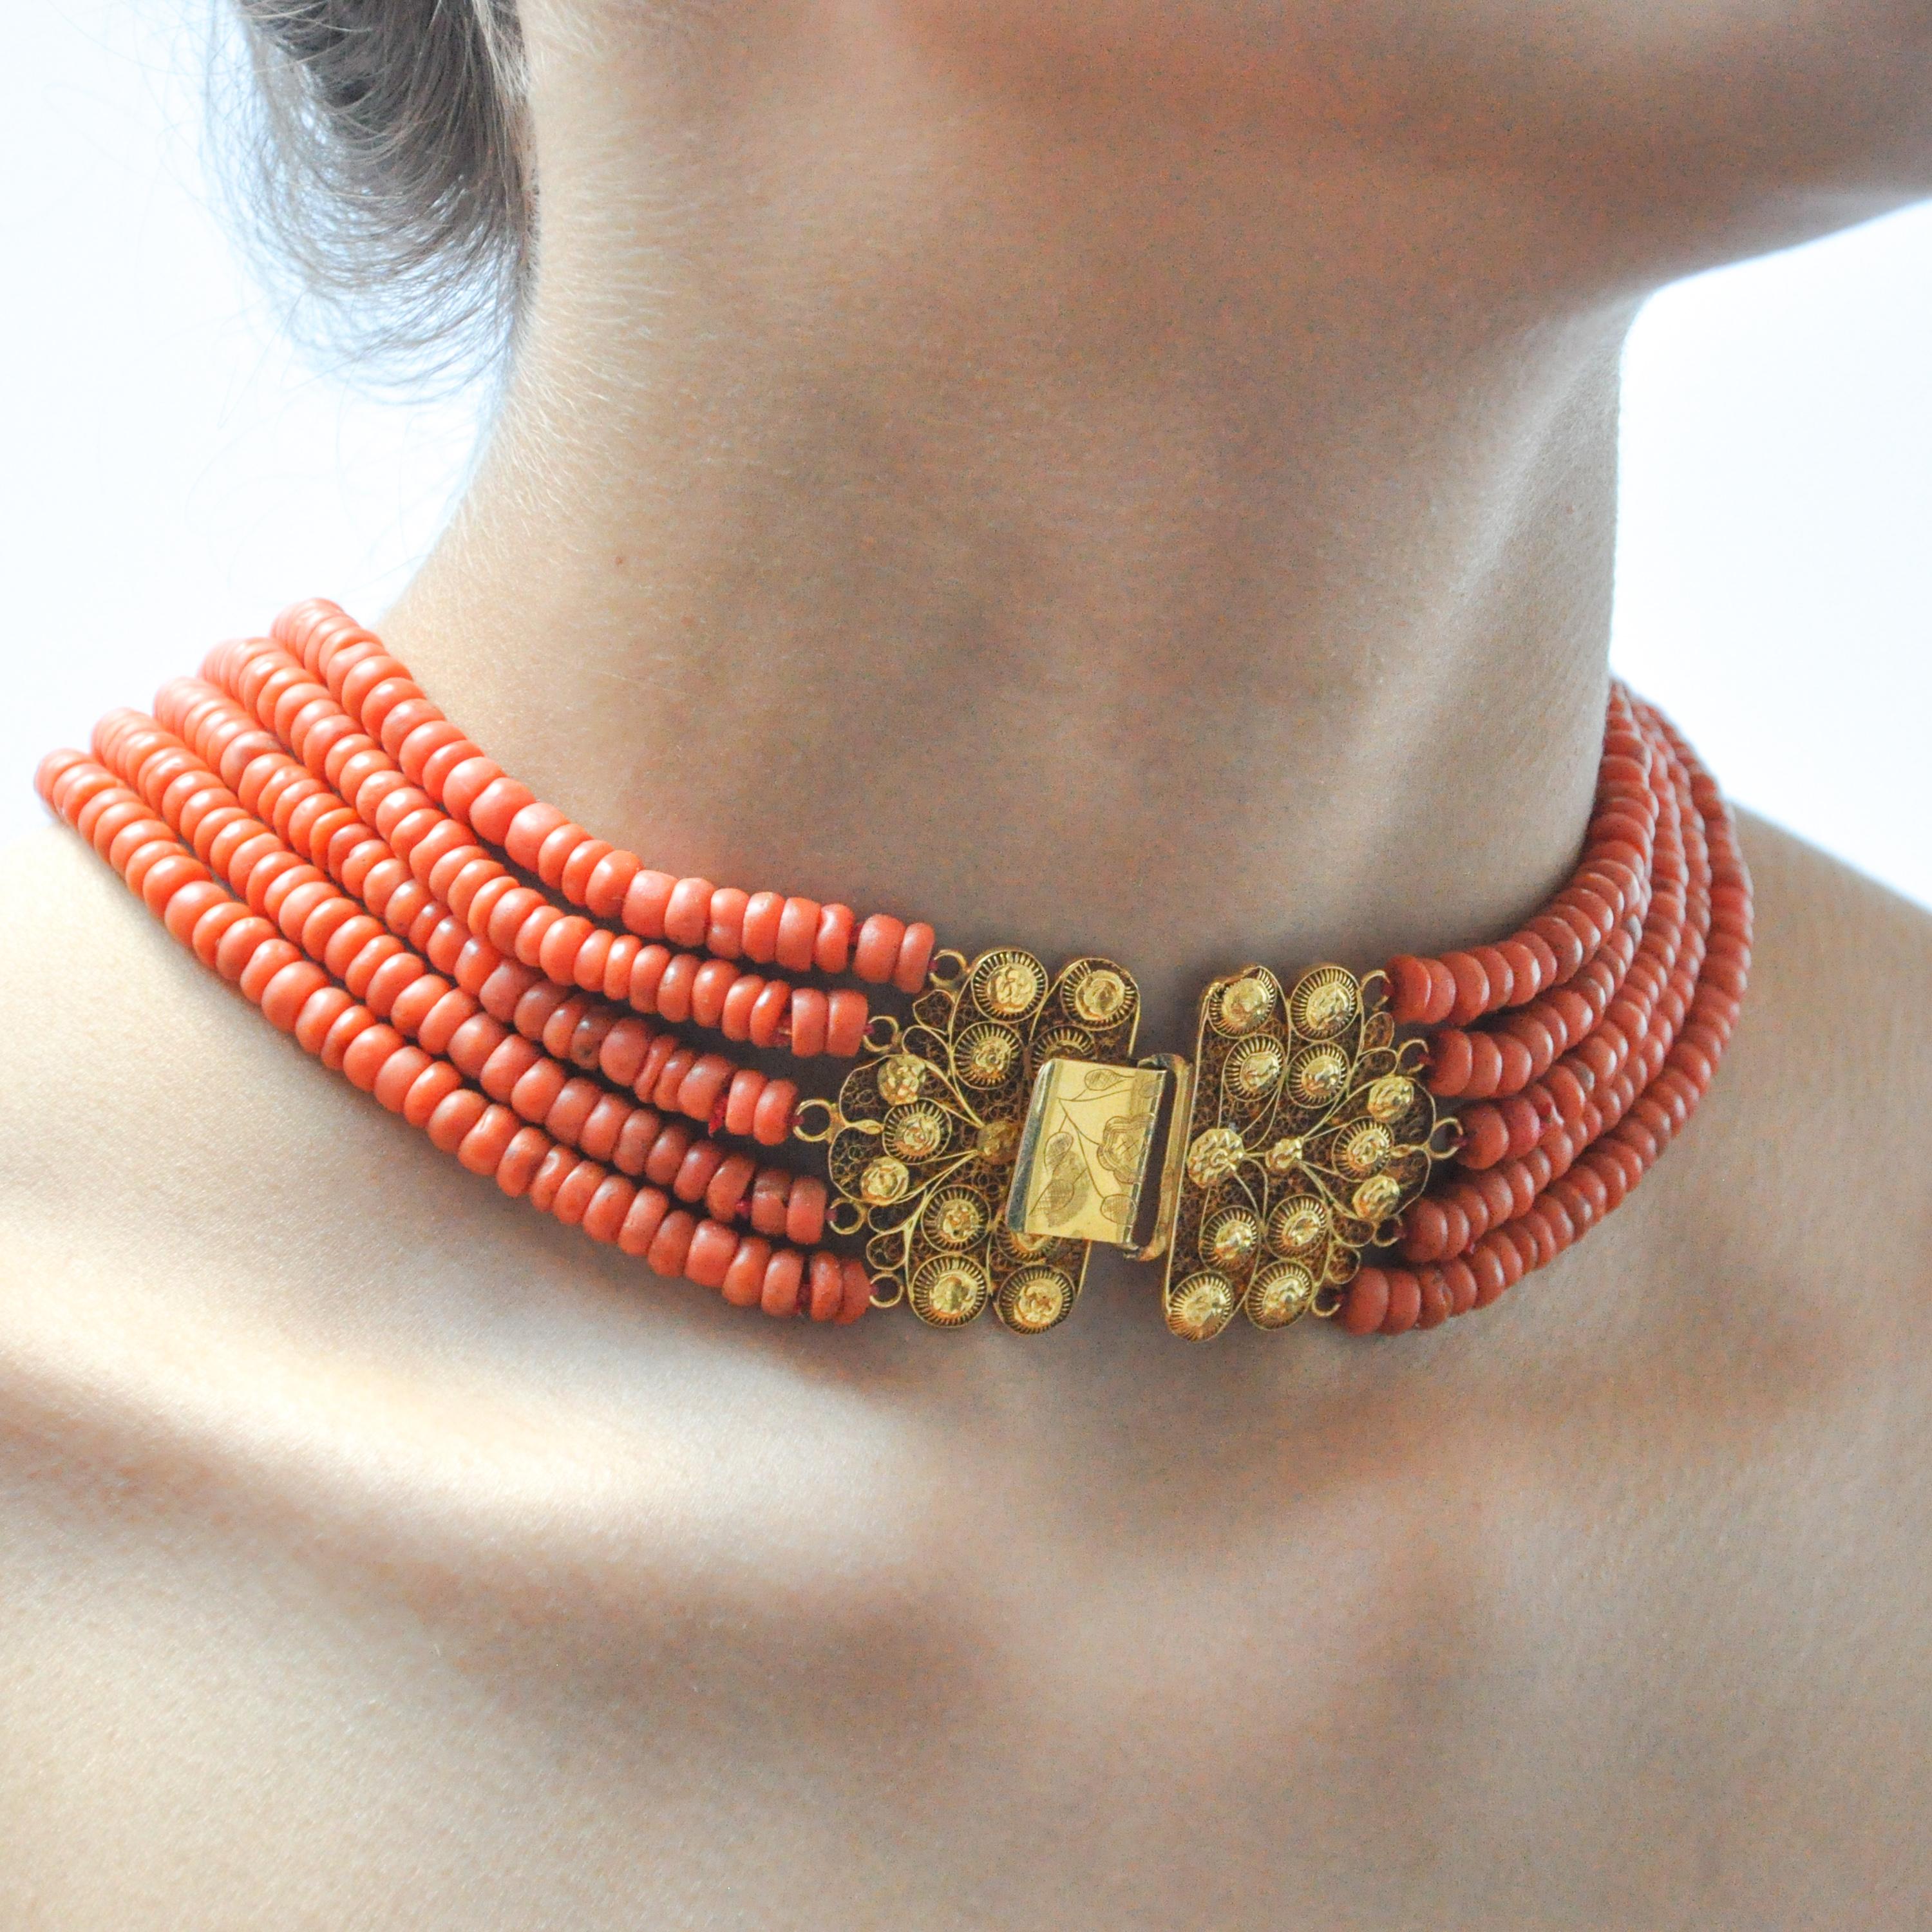 This antique 19th century red coral necklace is set with a large 18 karat gold clasp. The clasp is made of fine filigree and cannetille work, the craftsmanship is stunning. The closure of the clasp has a lovely floral engraving. The six strands are